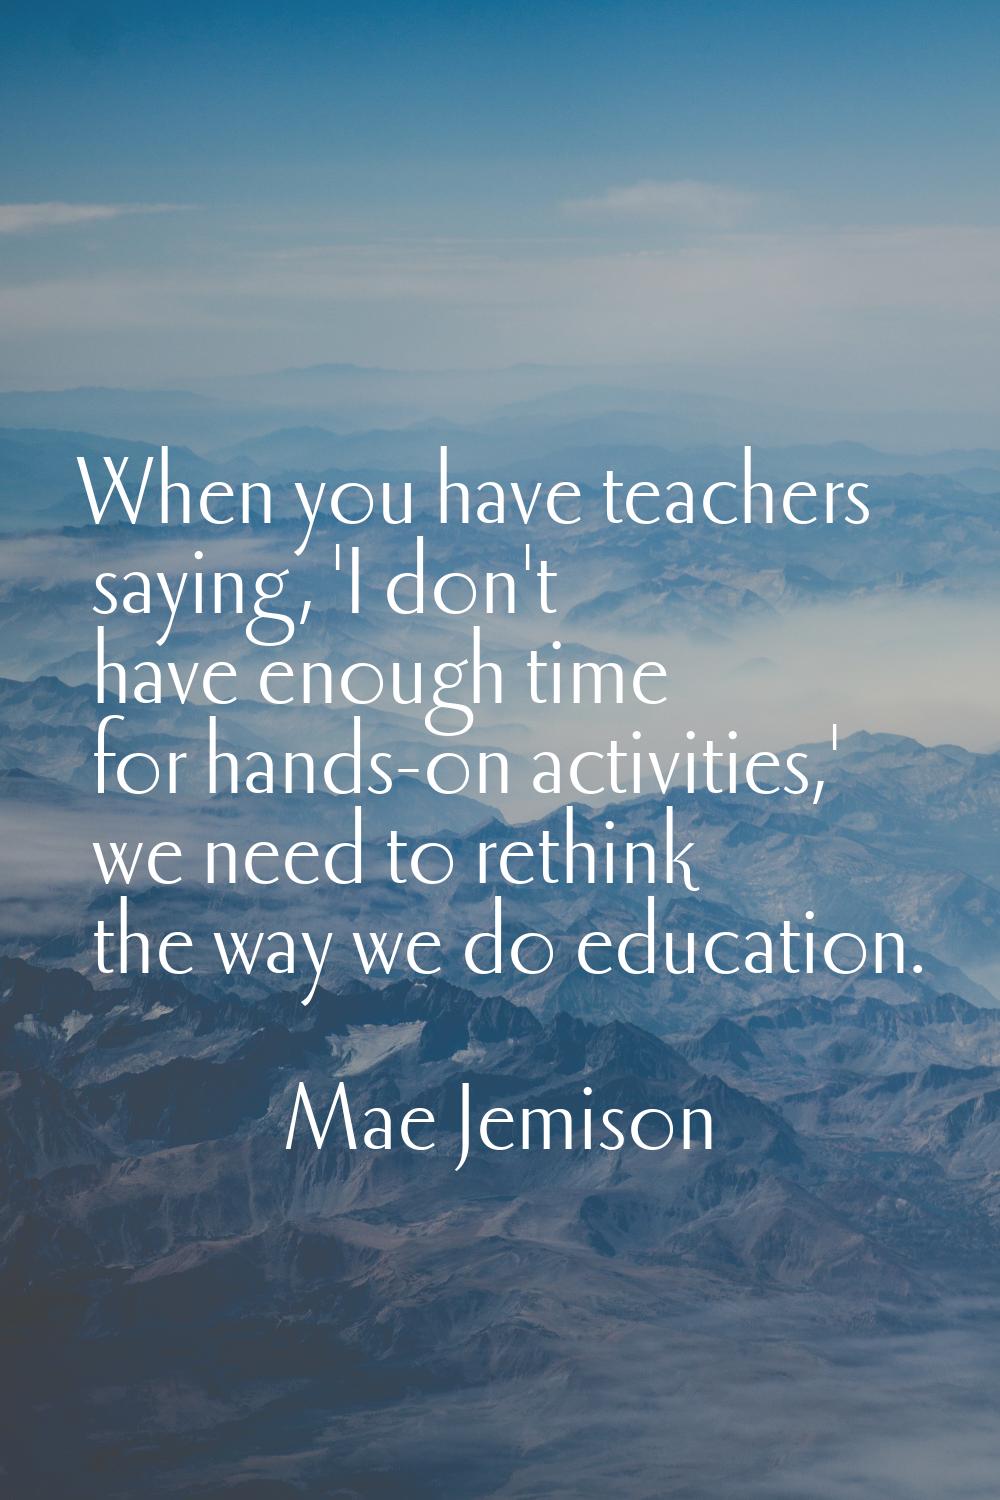 When you have teachers saying, 'I don't have enough time for hands-on activities,' we need to rethi